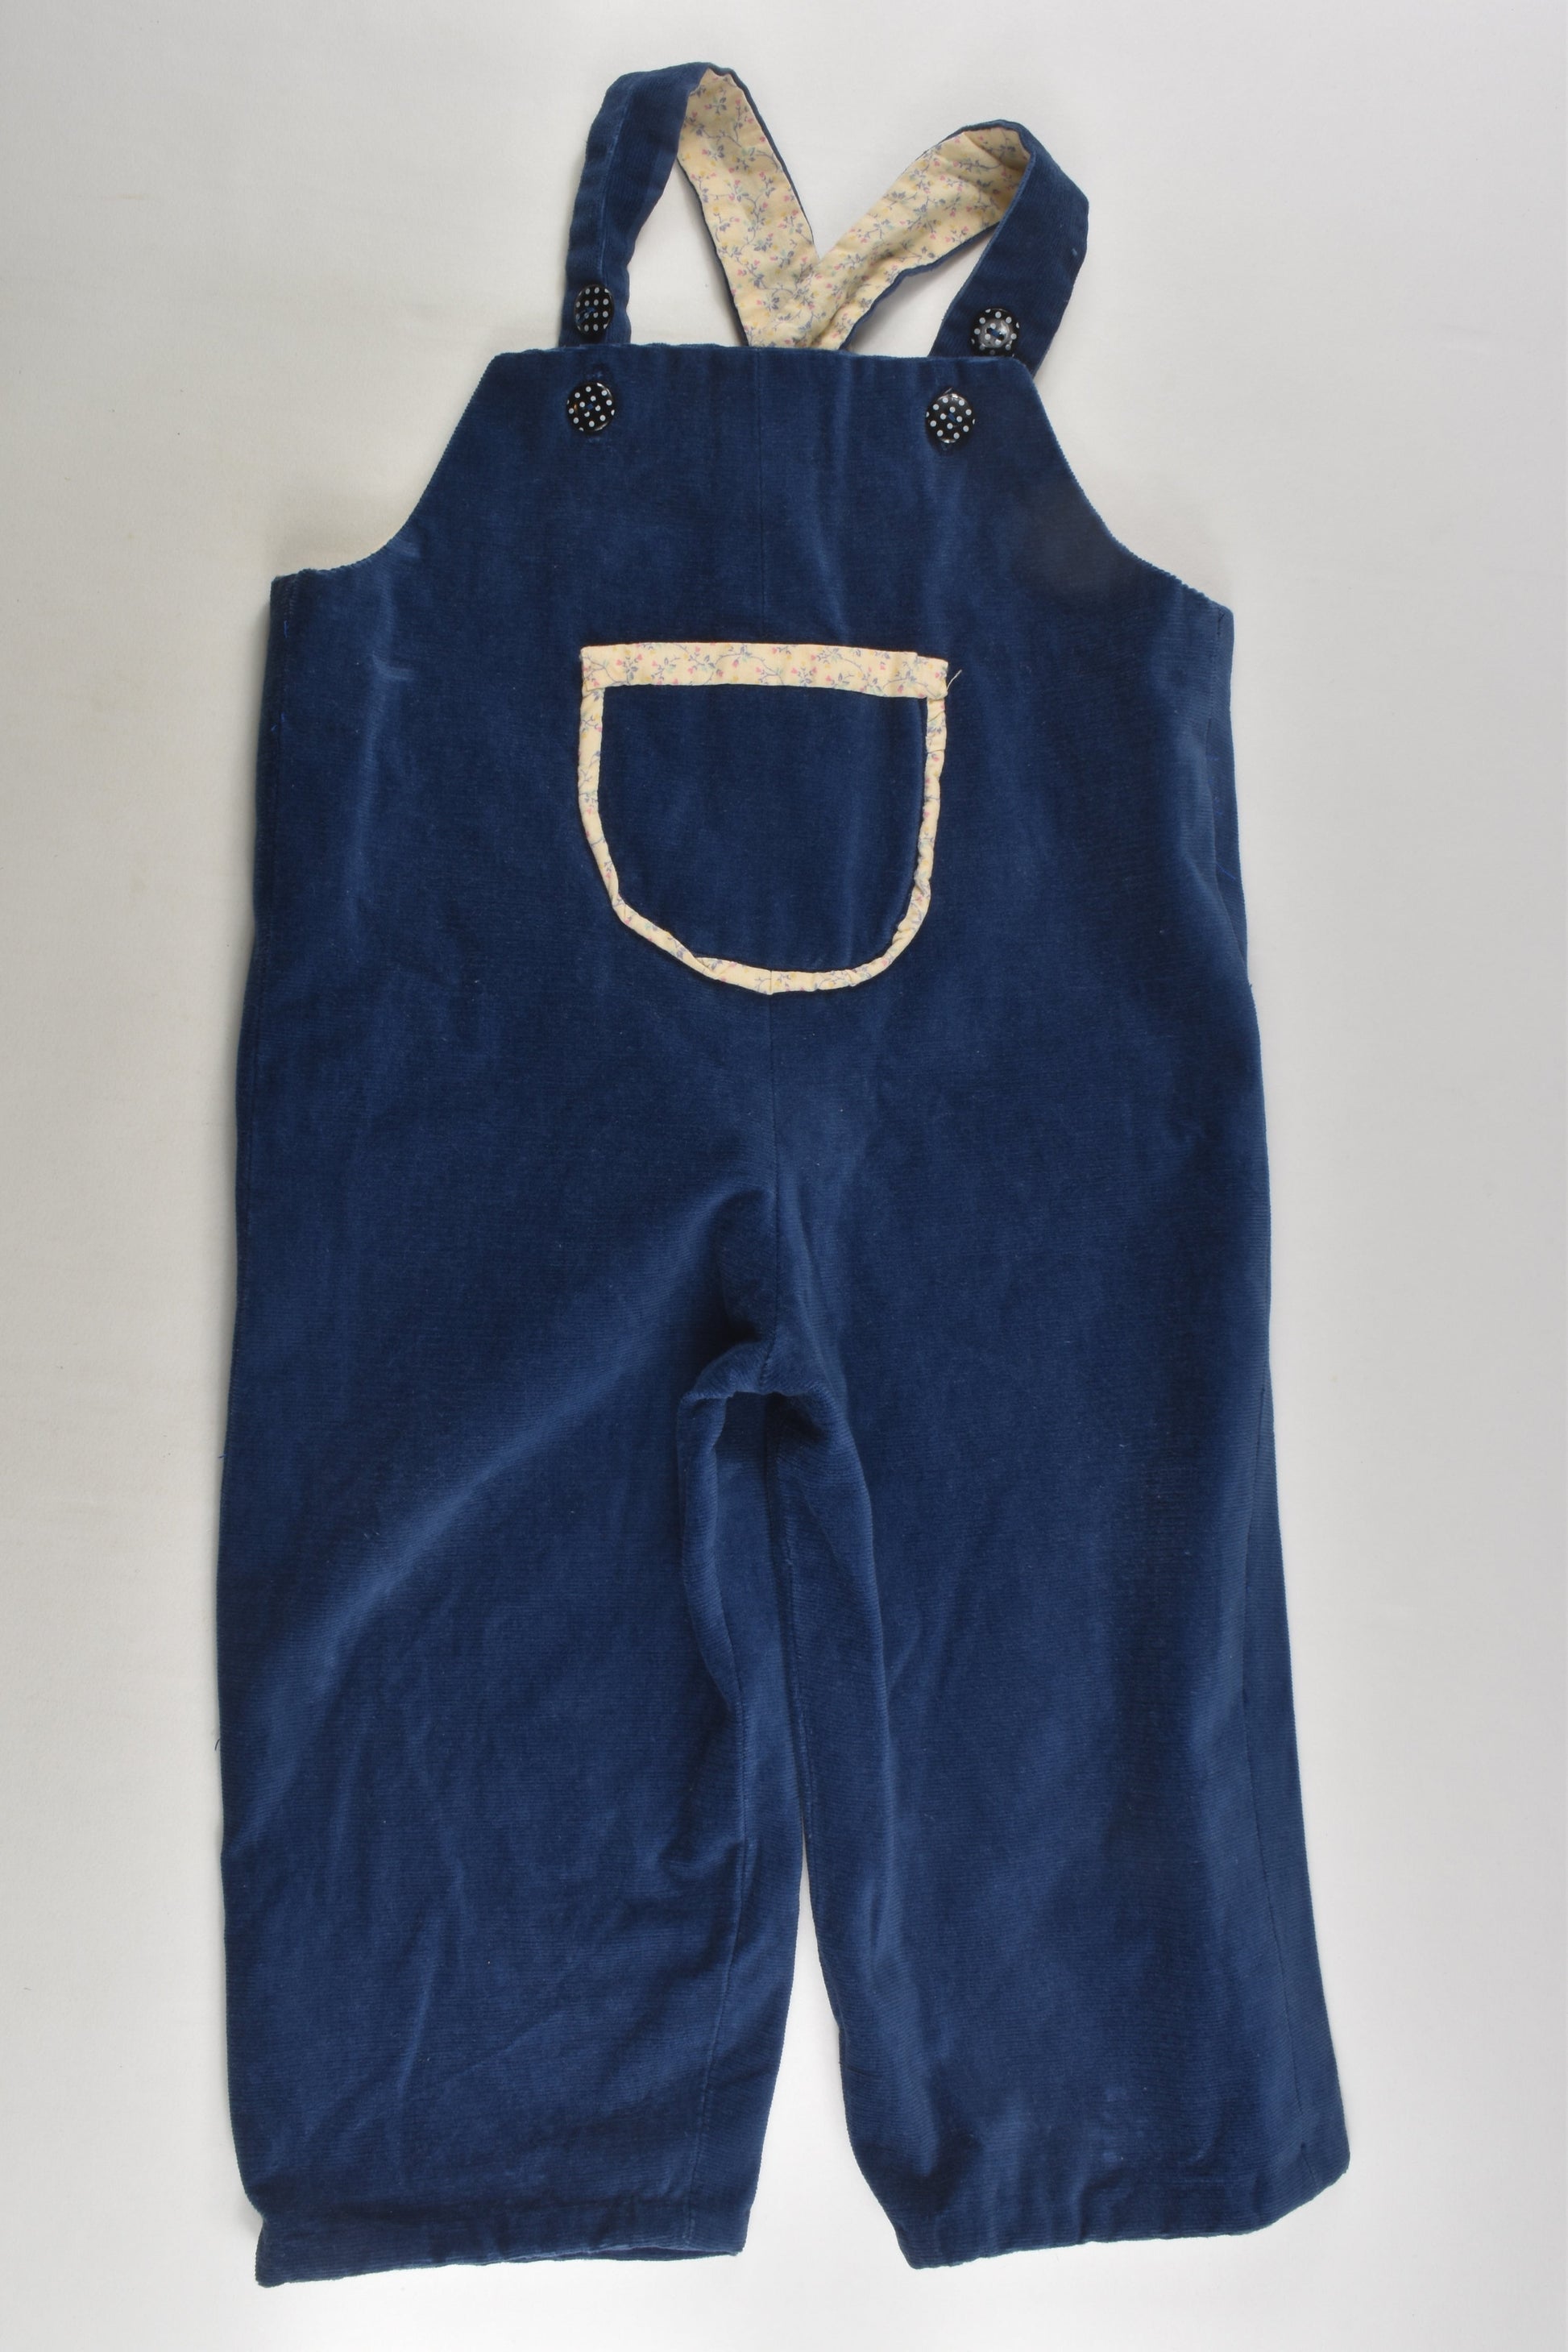 Handmade Size approx 1 Overalls